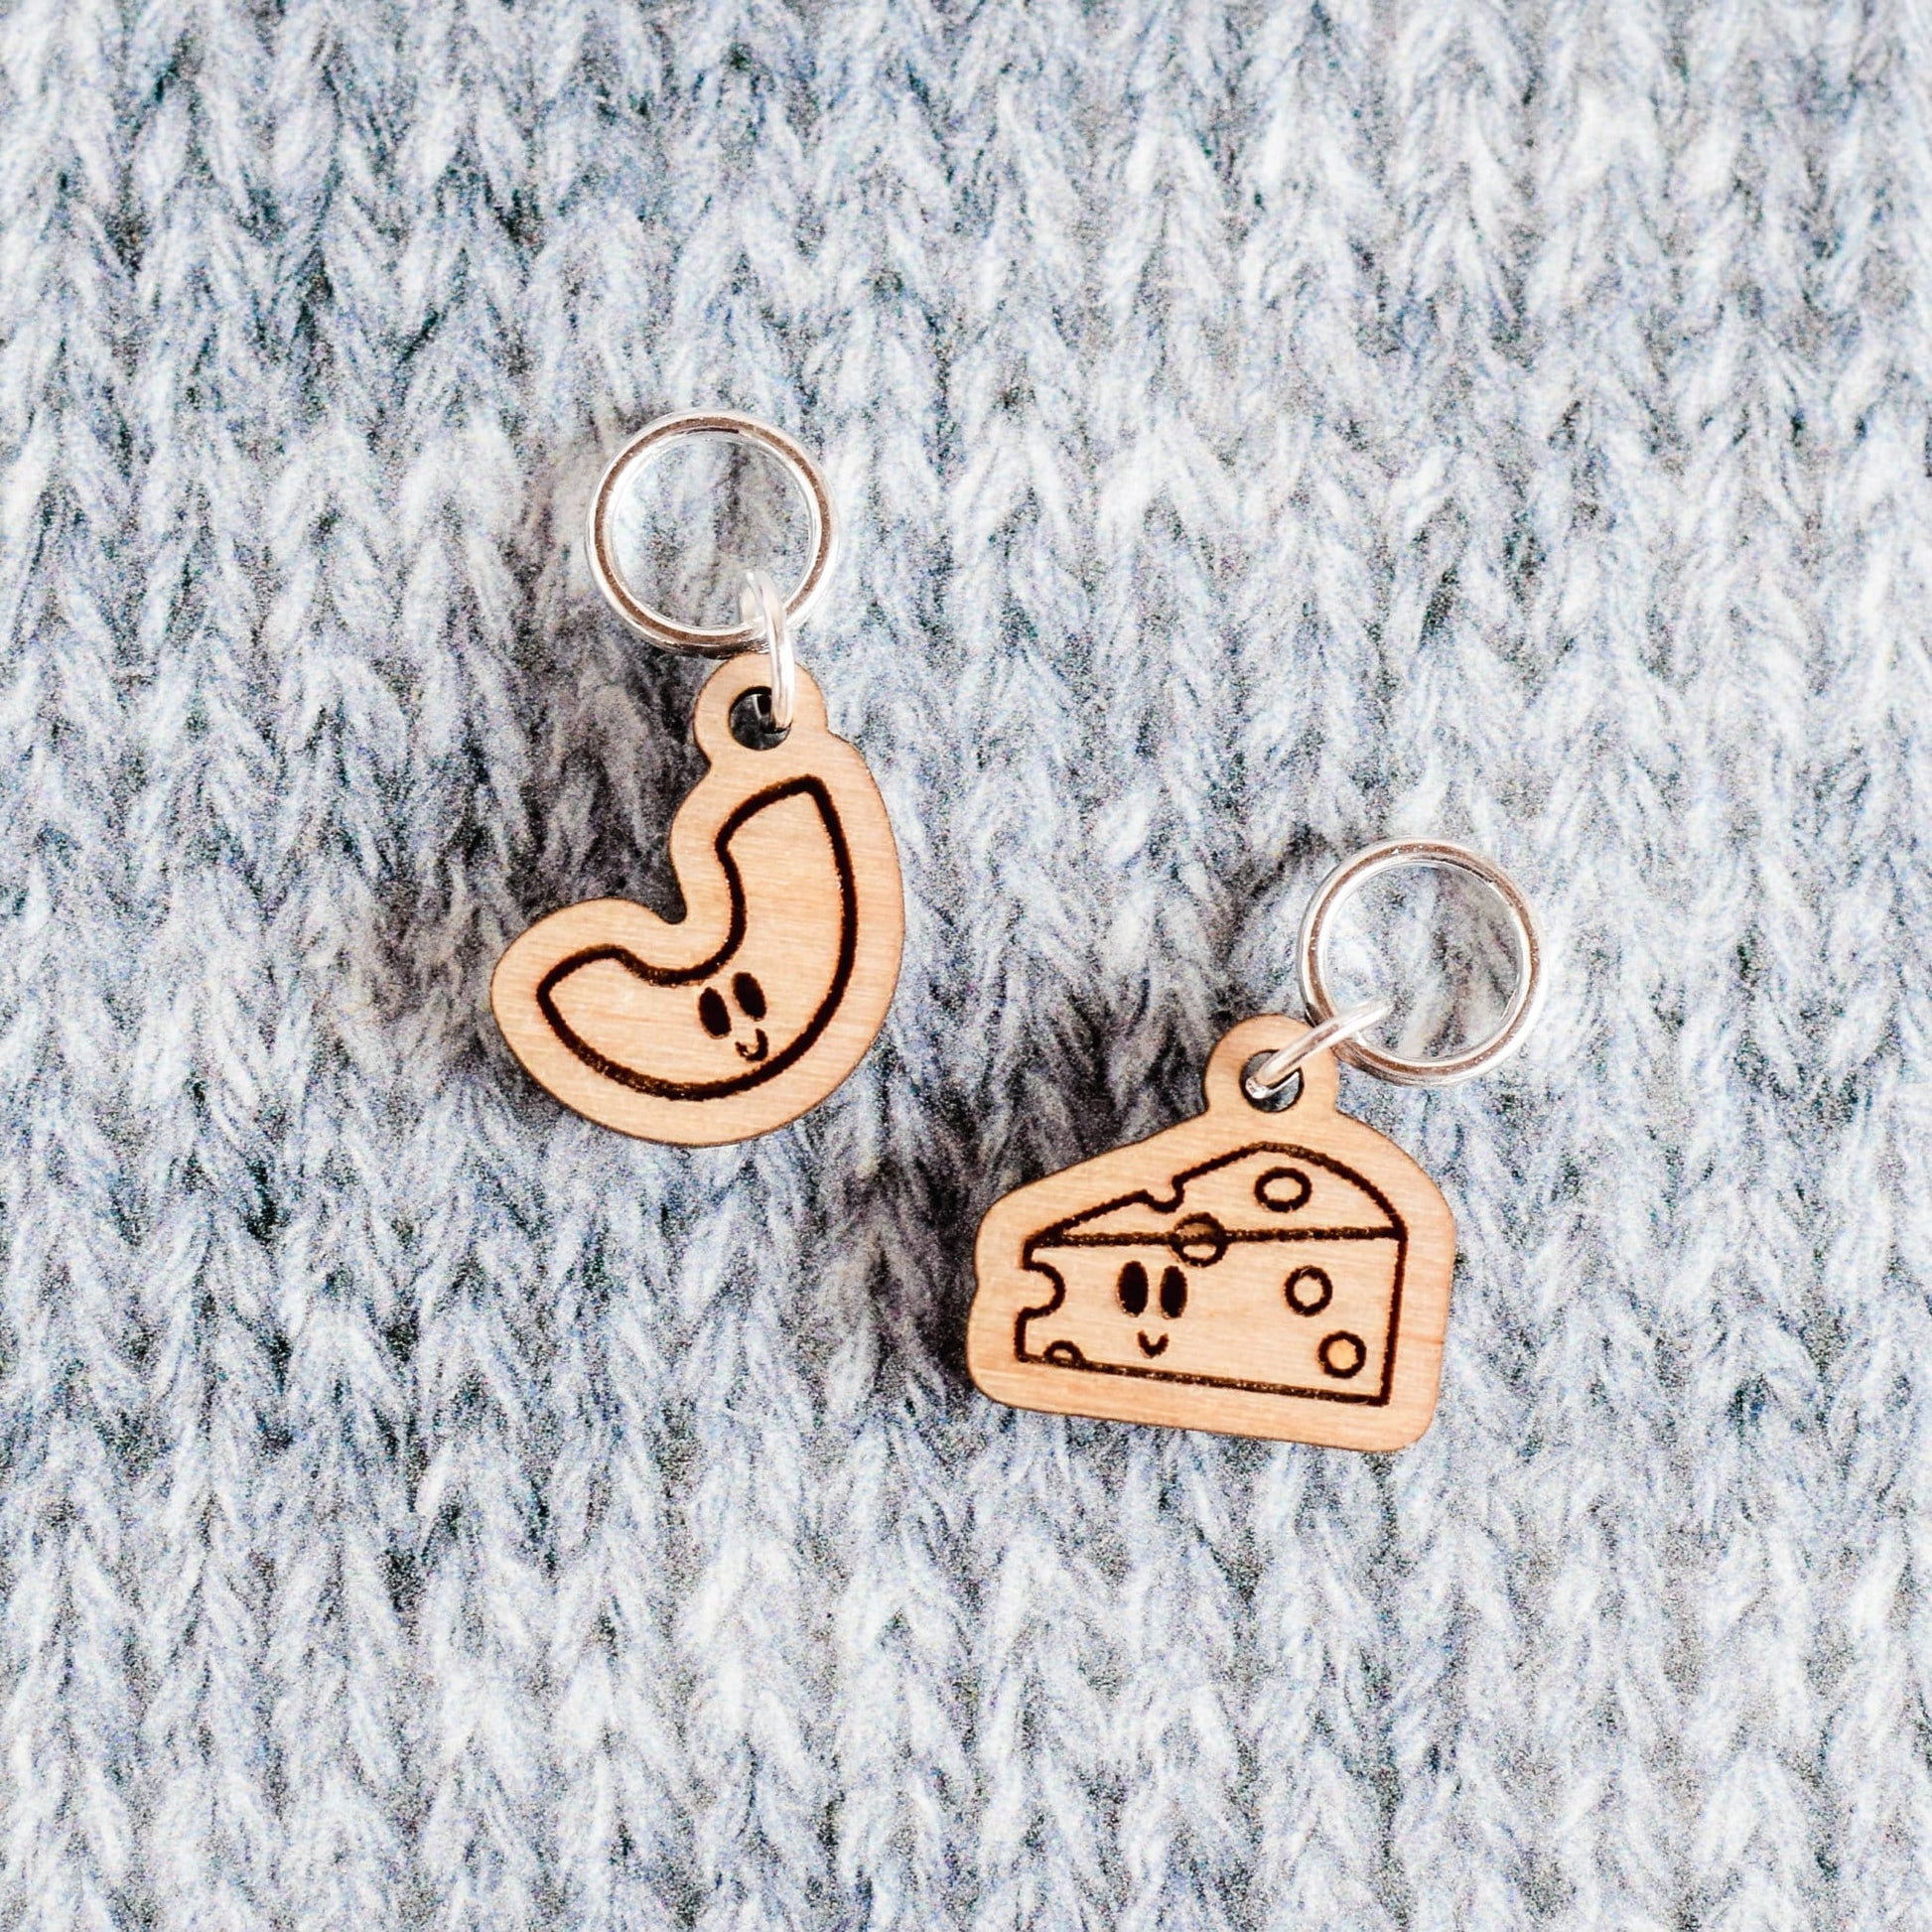 Set of 2 Stitch Markers, Kawaii Macaroni and Cheese, Laser Engraved Wood Stitch Markers